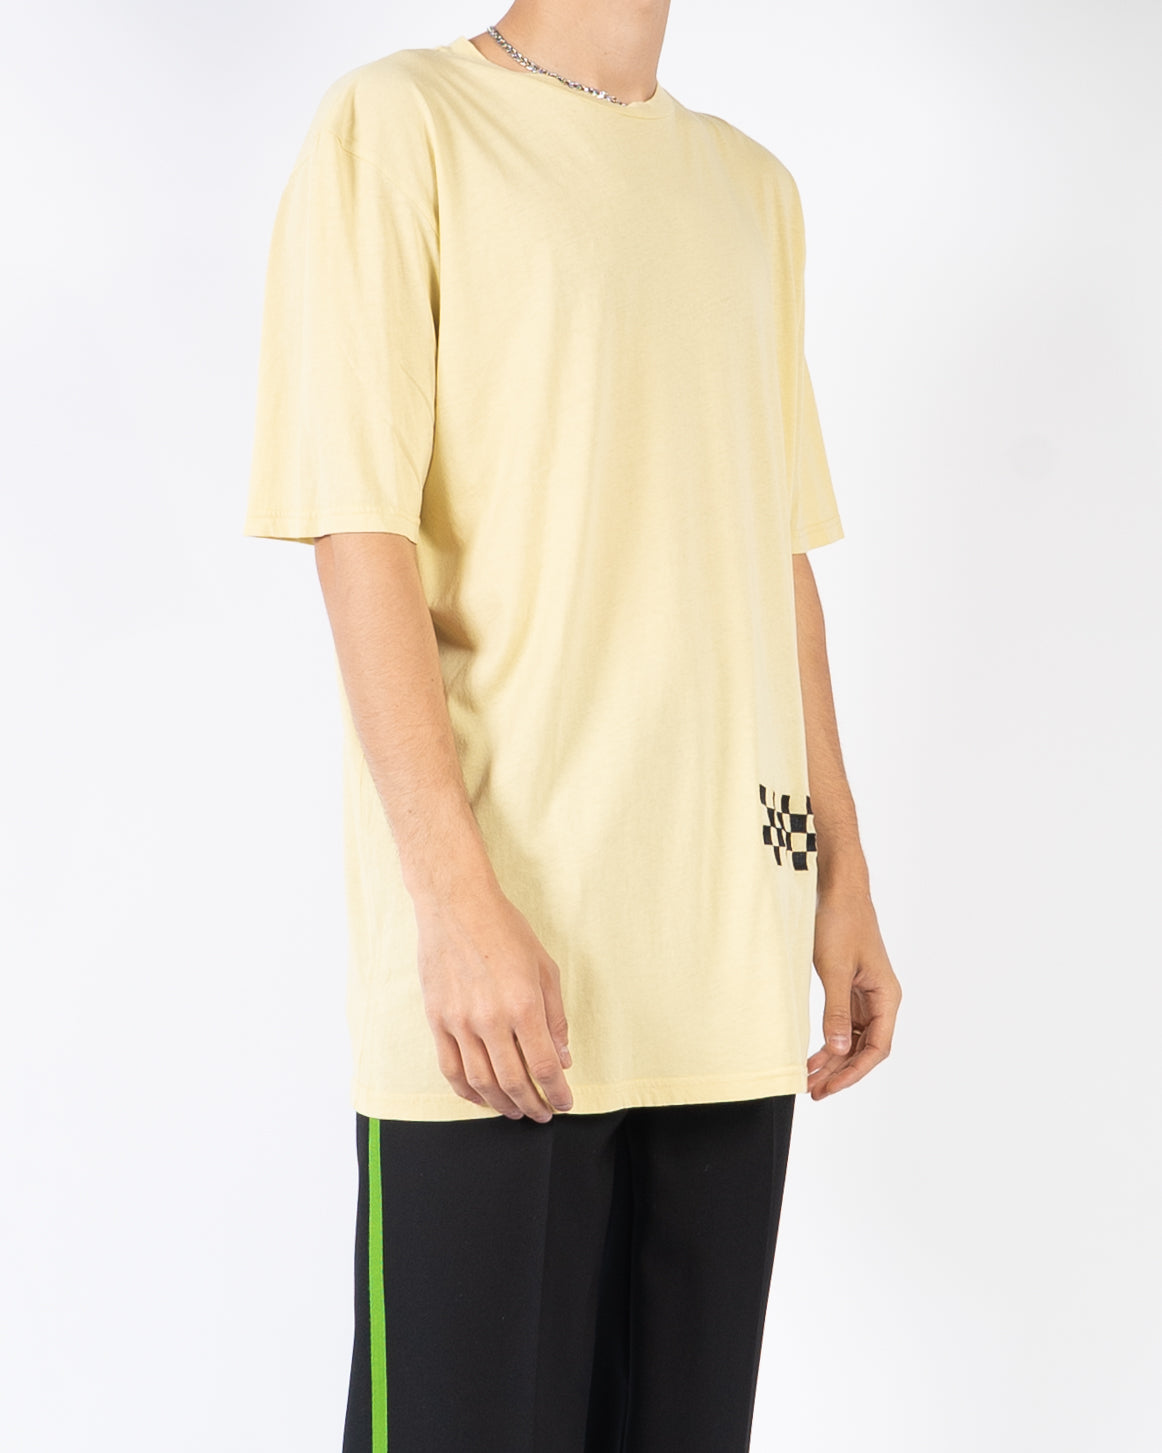 FW19 Yellow Checked Embroidered T-Shirt